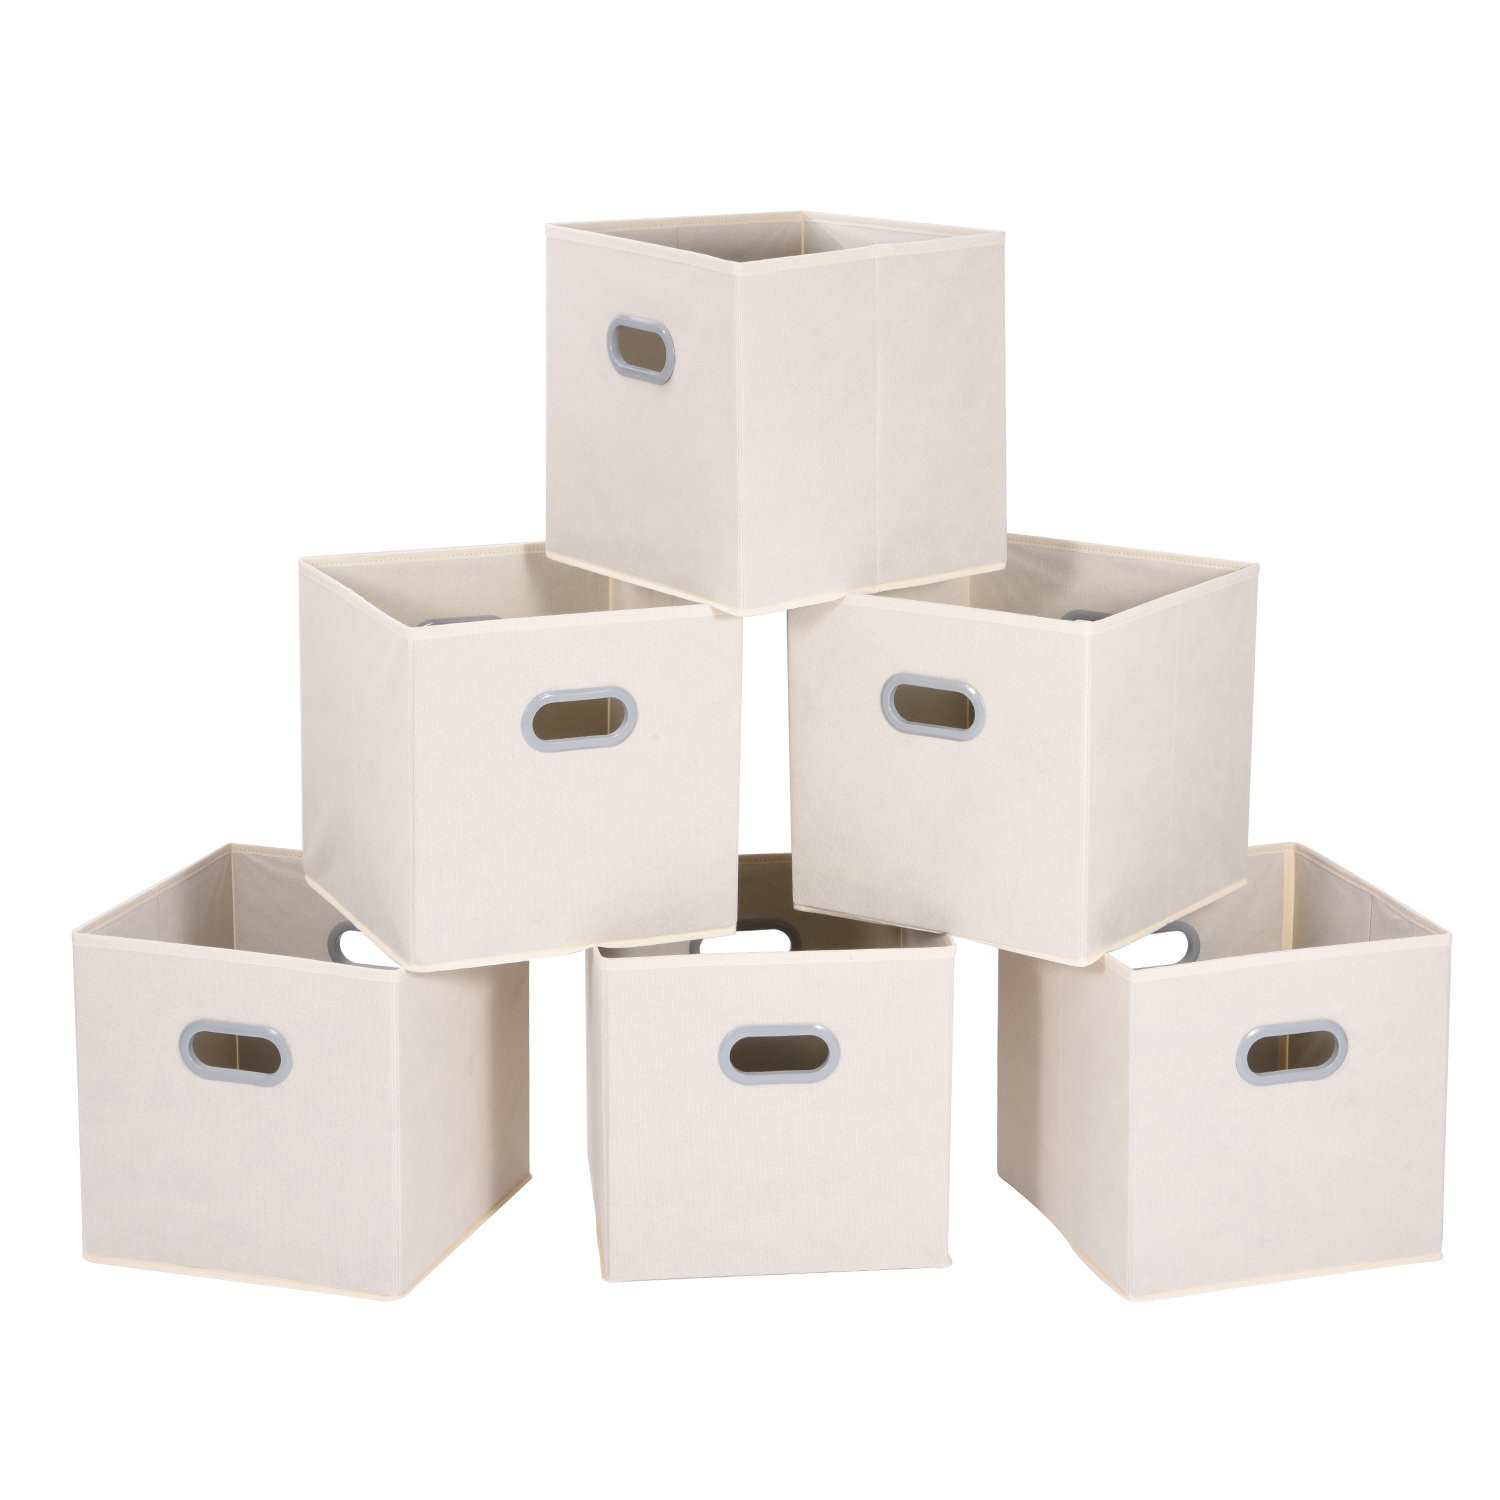 Bedroom Storage Bins
 MaidMAX Cloth Storage Bins Cubes Baskets Containers with